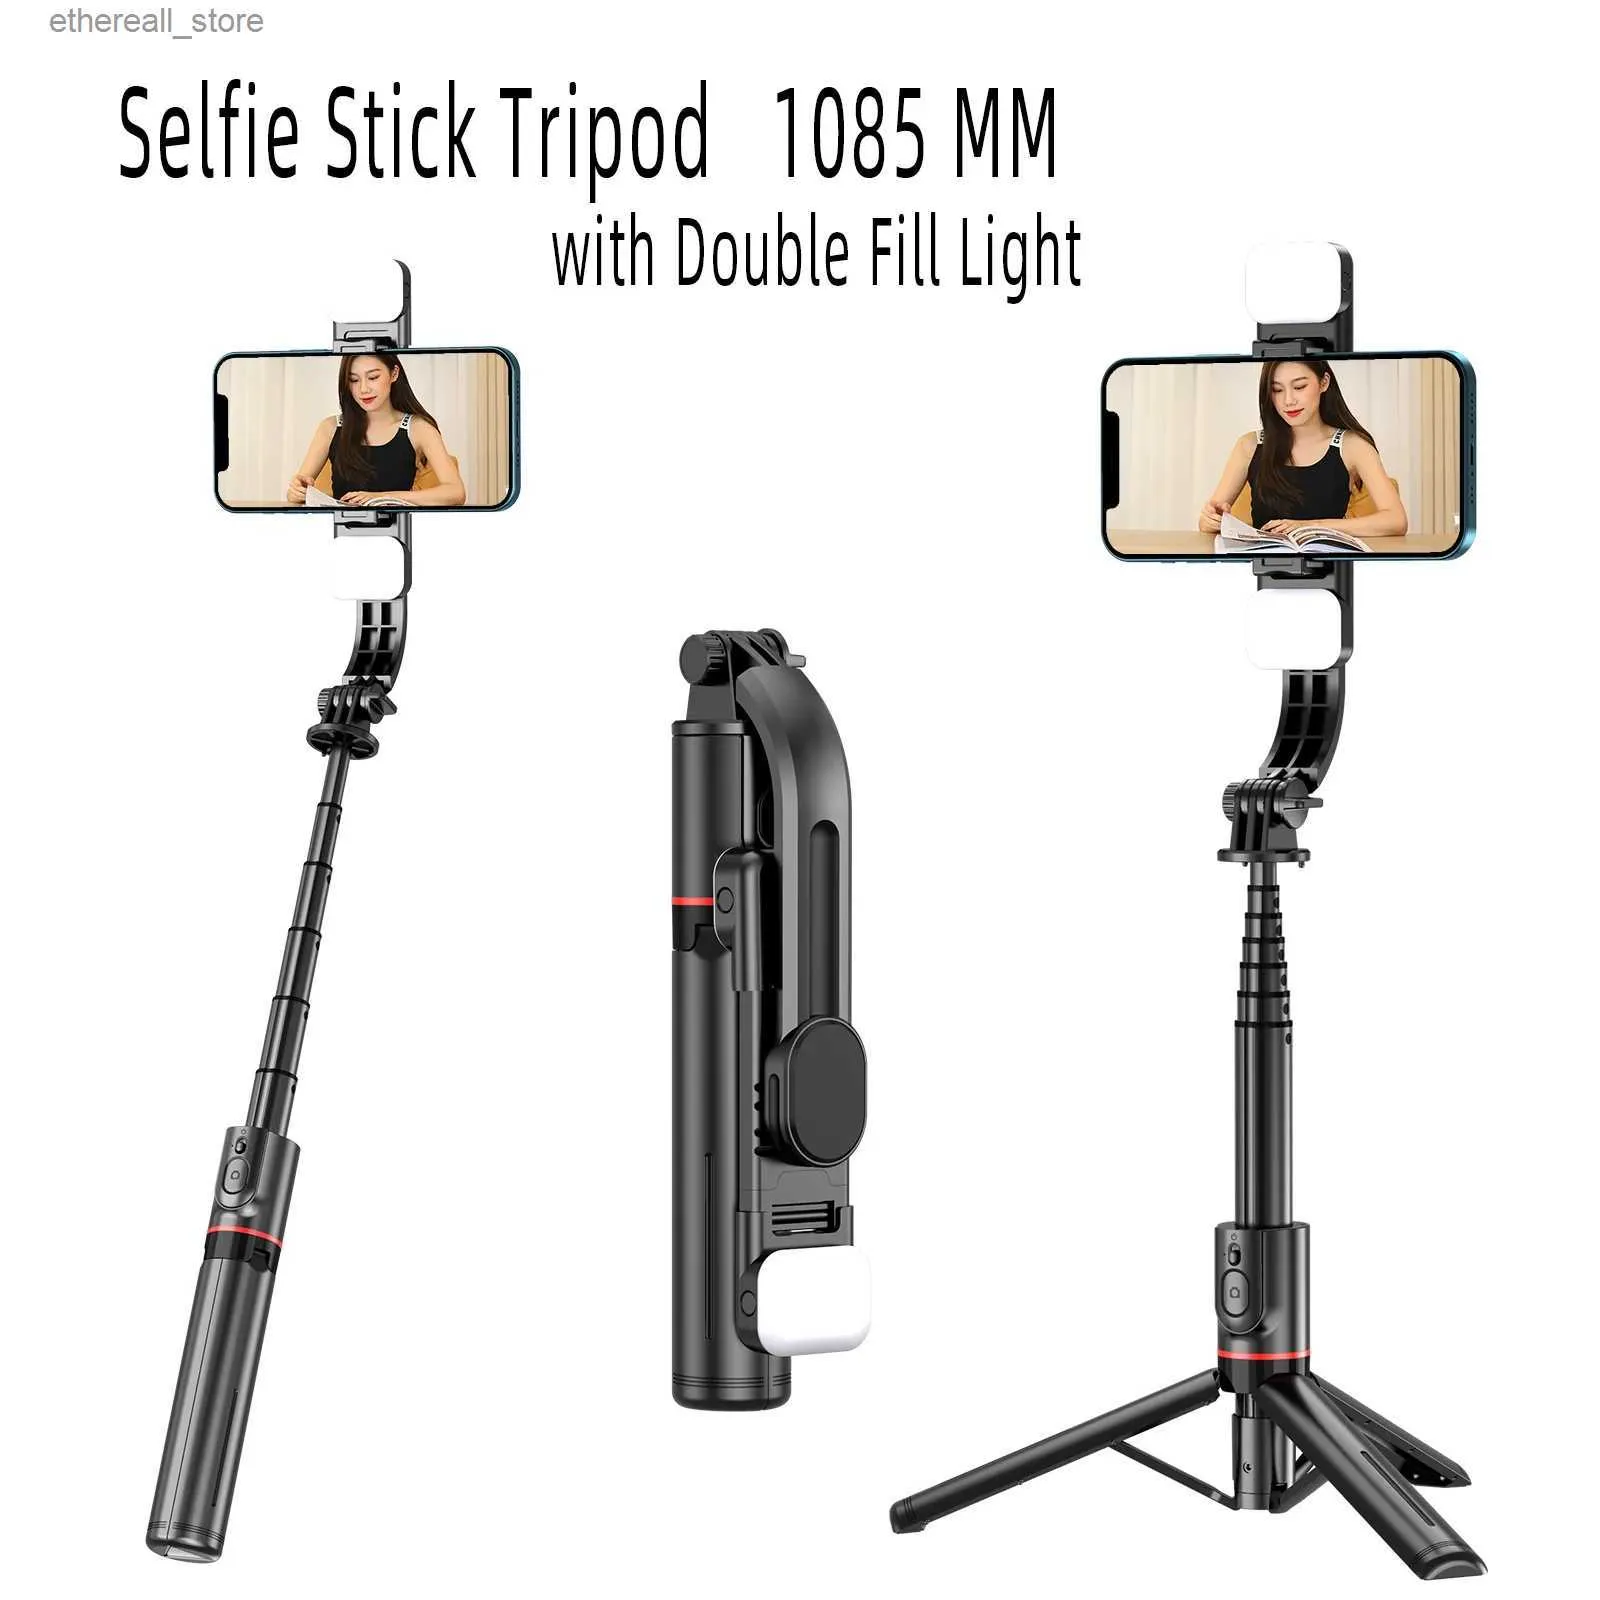 Selfie Monopods 1085MM Selfie Stick Tripod with Fill Light Wireless Remote Mini Phone Tripod Foldable Portable Phone Stand Holder for Smartphone Q231110